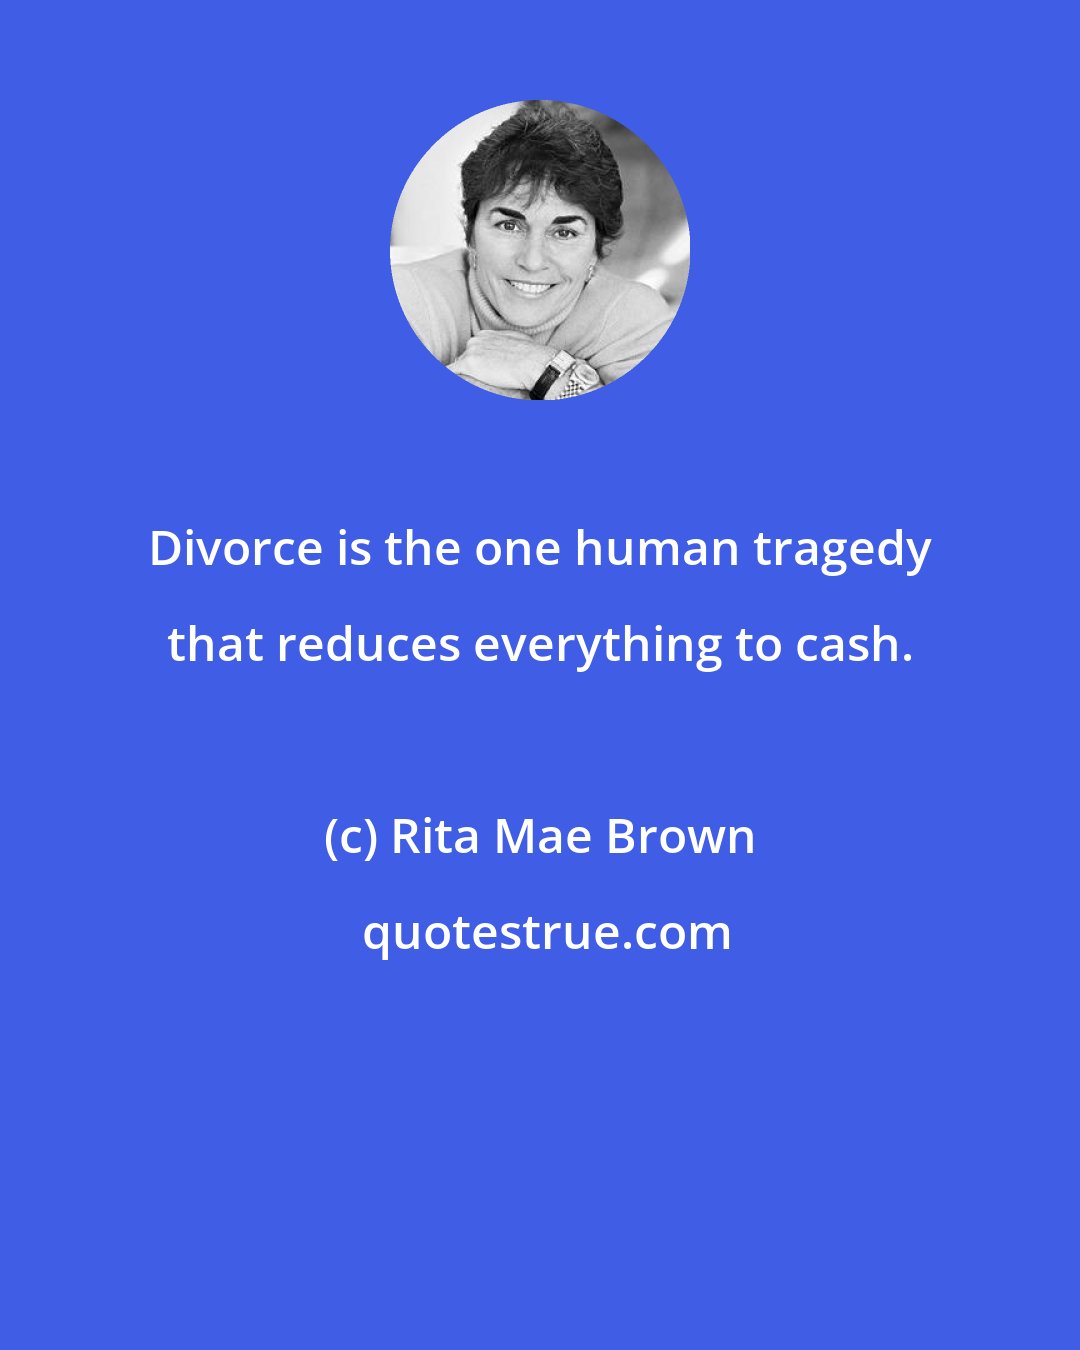 Rita Mae Brown: Divorce is the one human tragedy that reduces everything to cash.